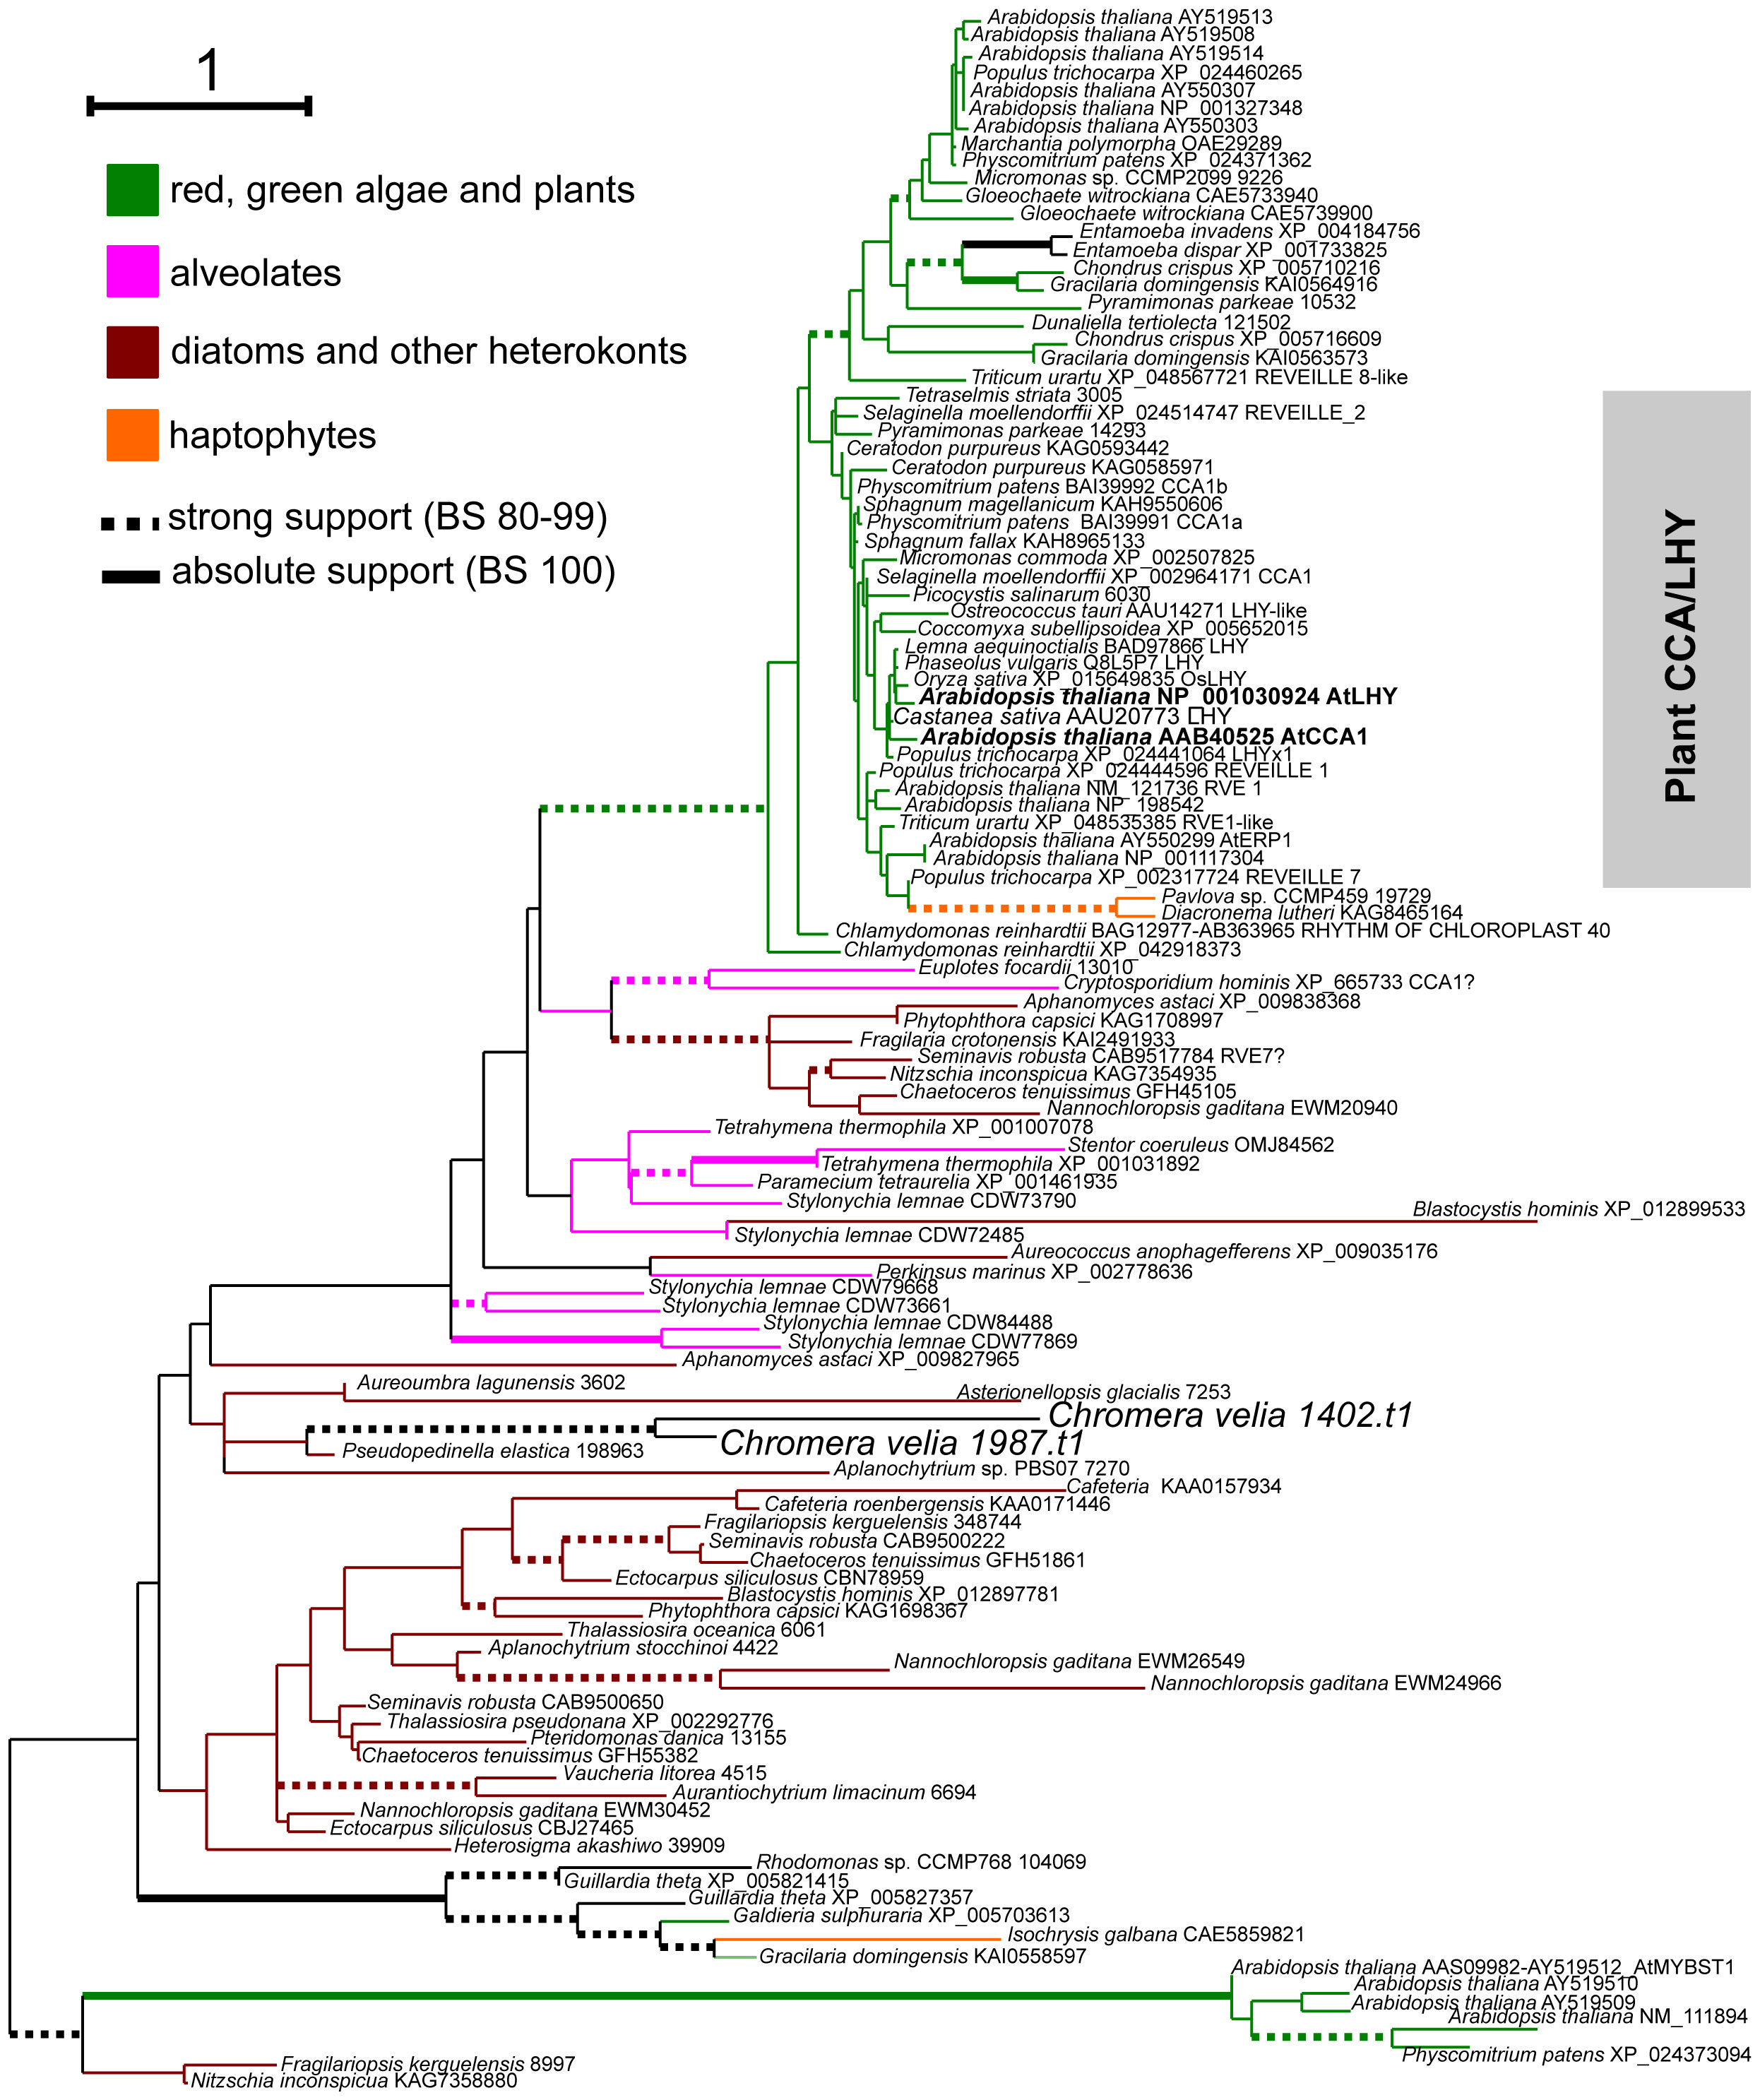 Ultrastructural characteristics of the type species Aureoumbra